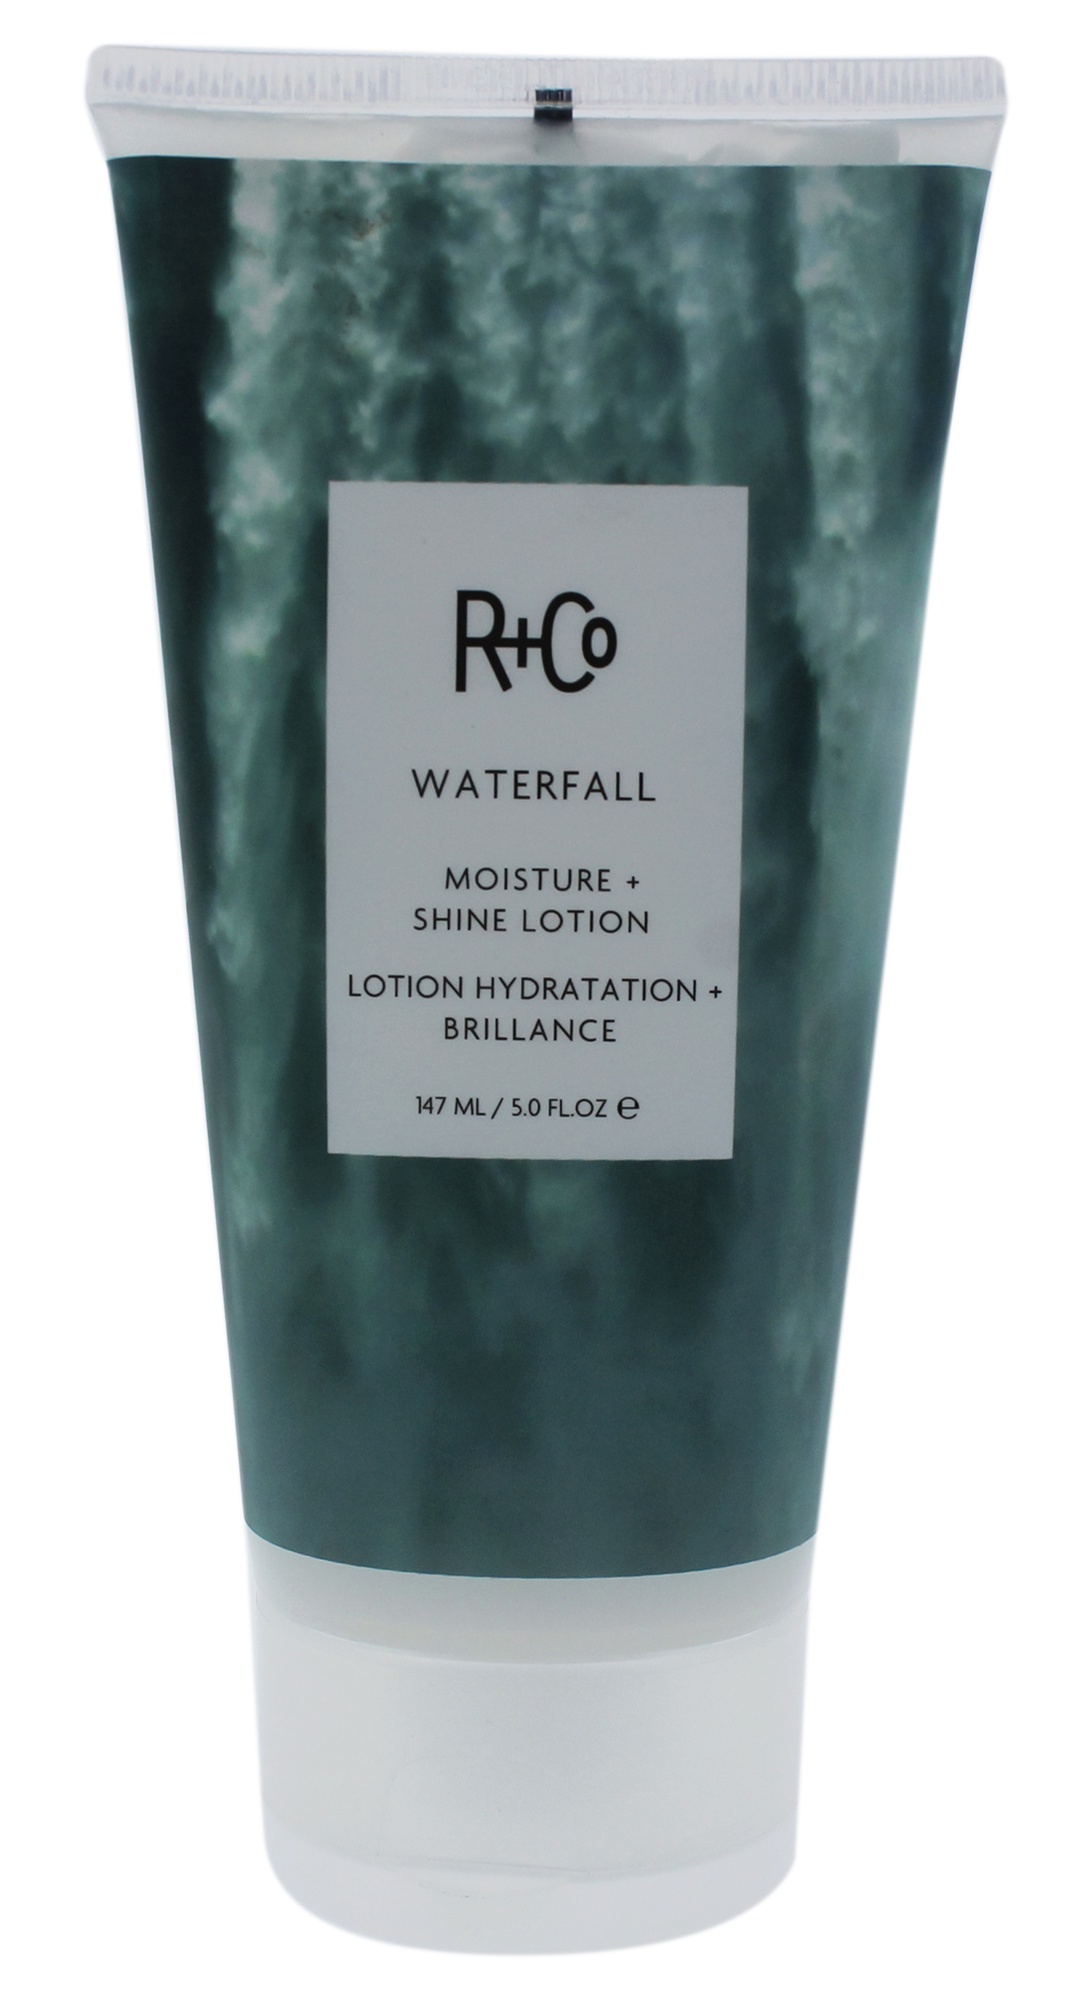 R+Co Waterfall Moisture And Shine Lotion